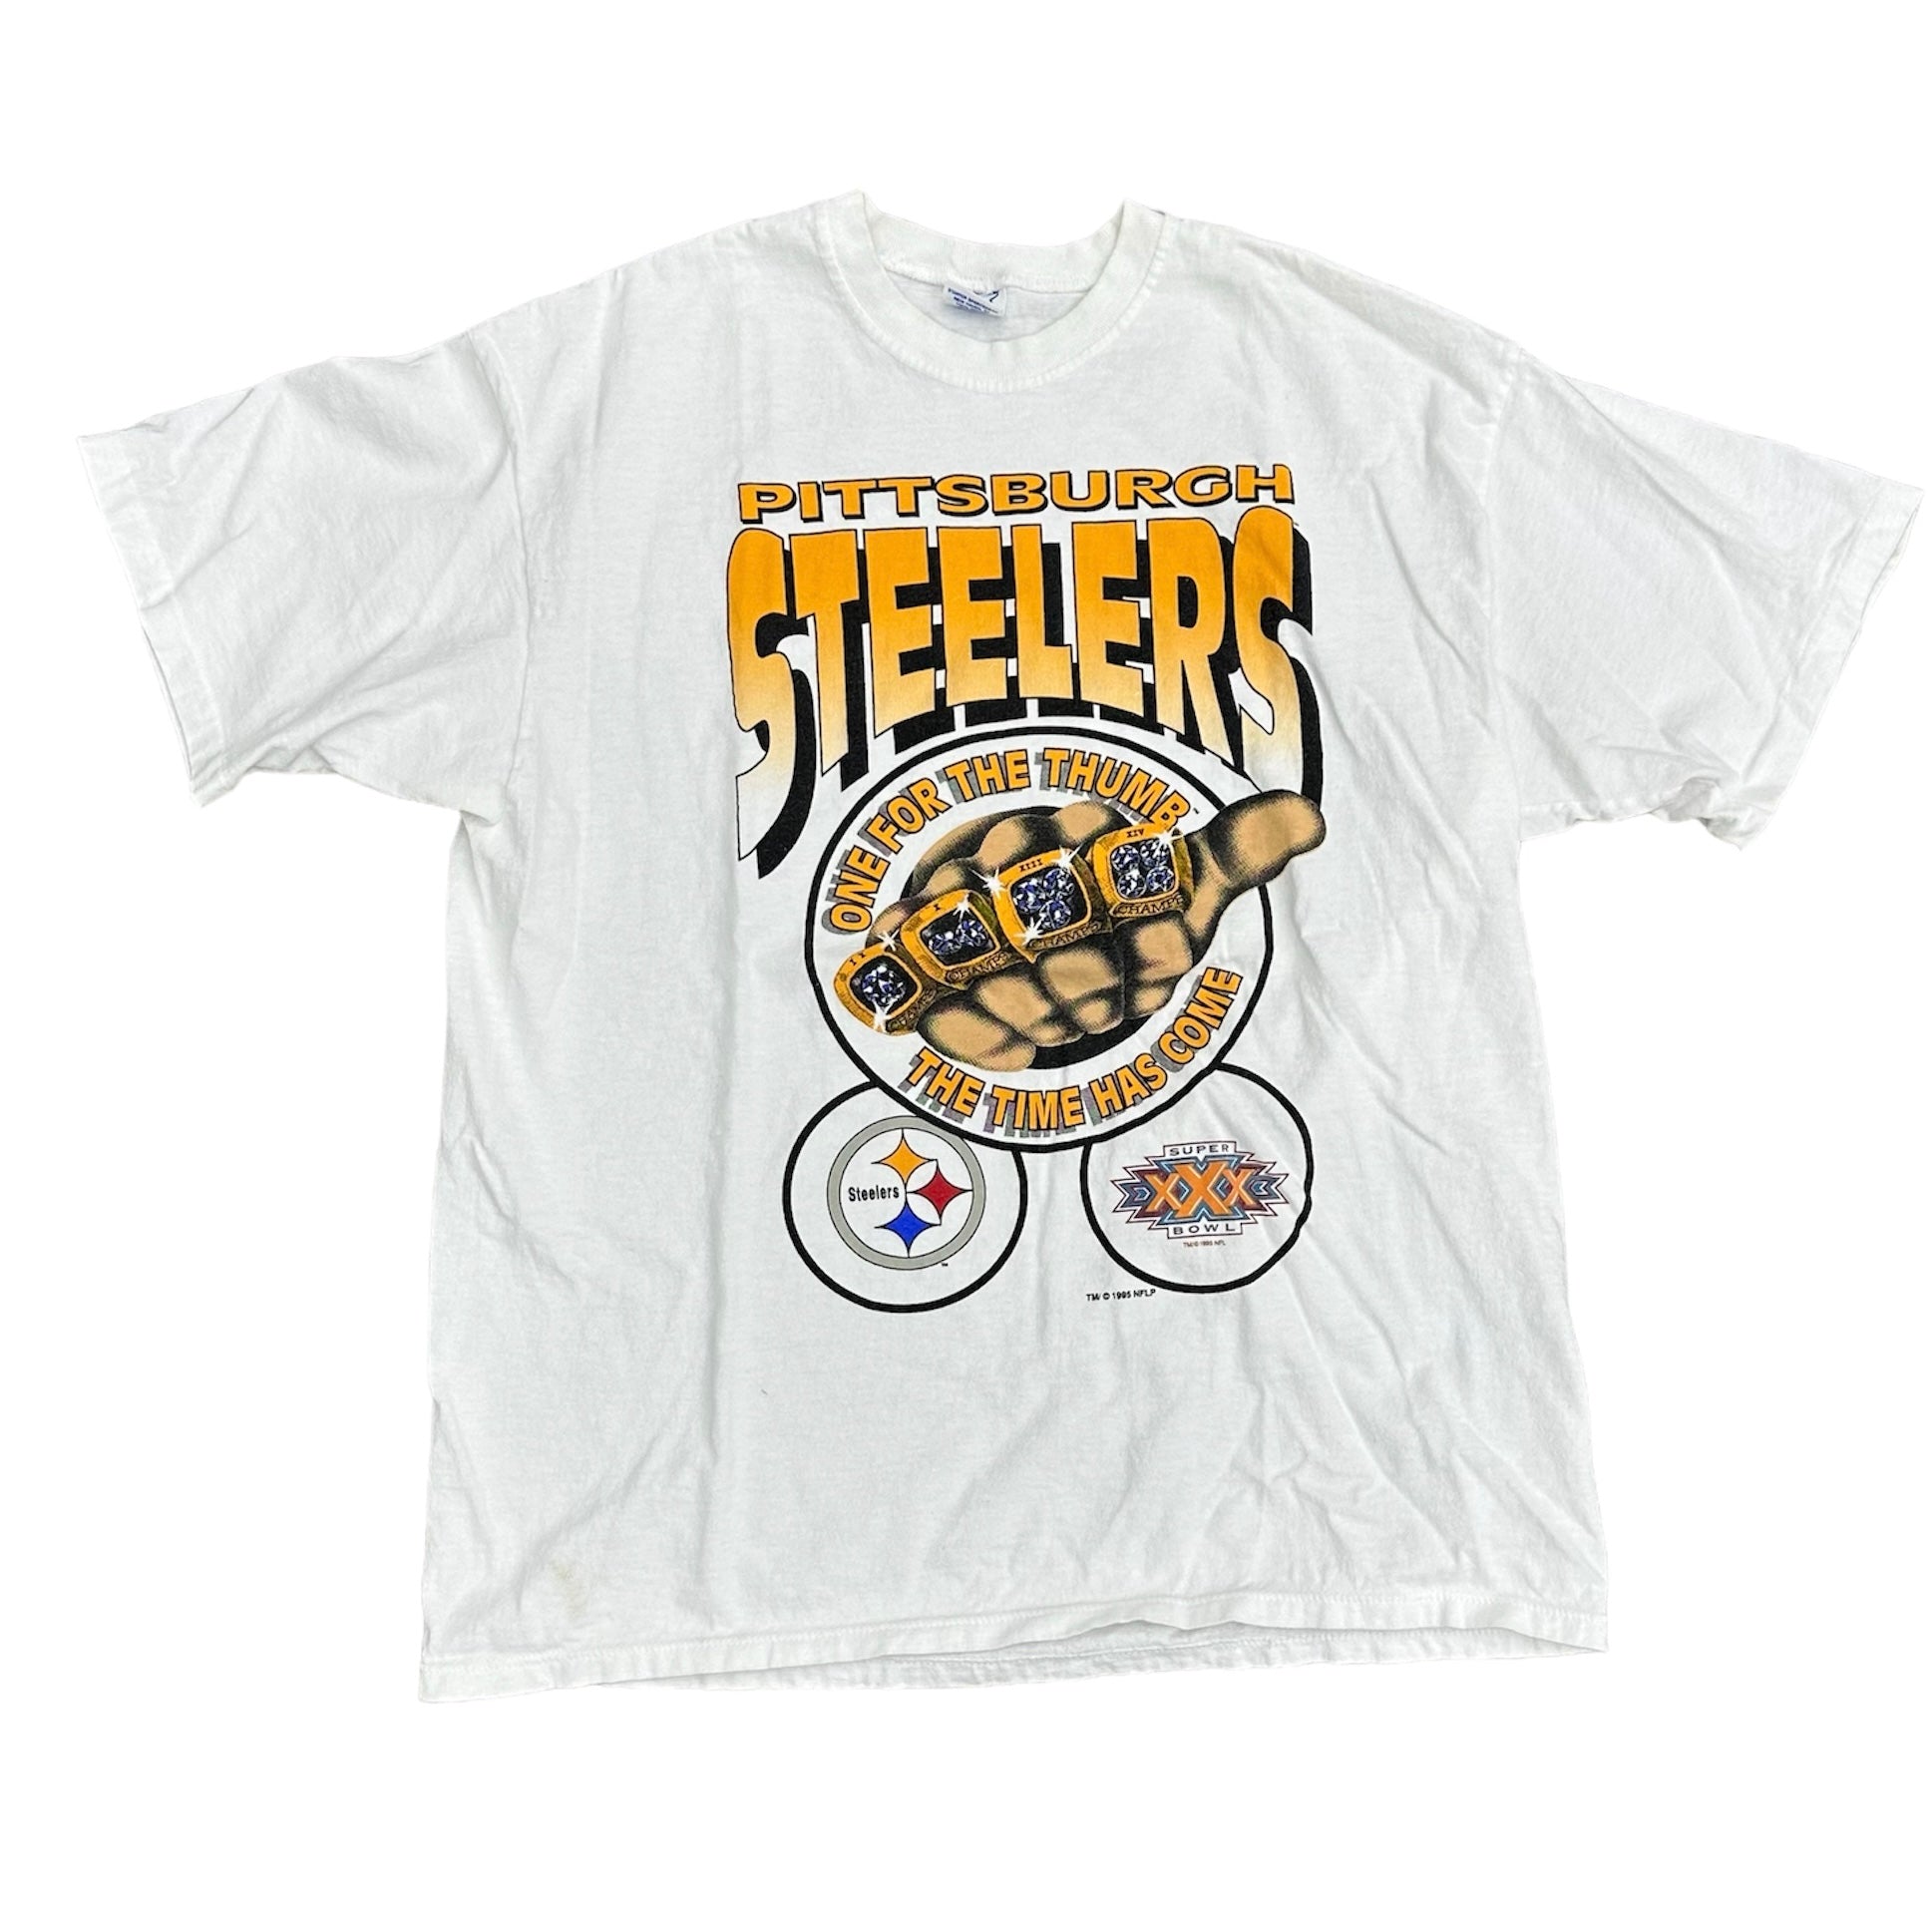 1995 STEELERS “ONE FOR THE THUMB” TEE (LR)